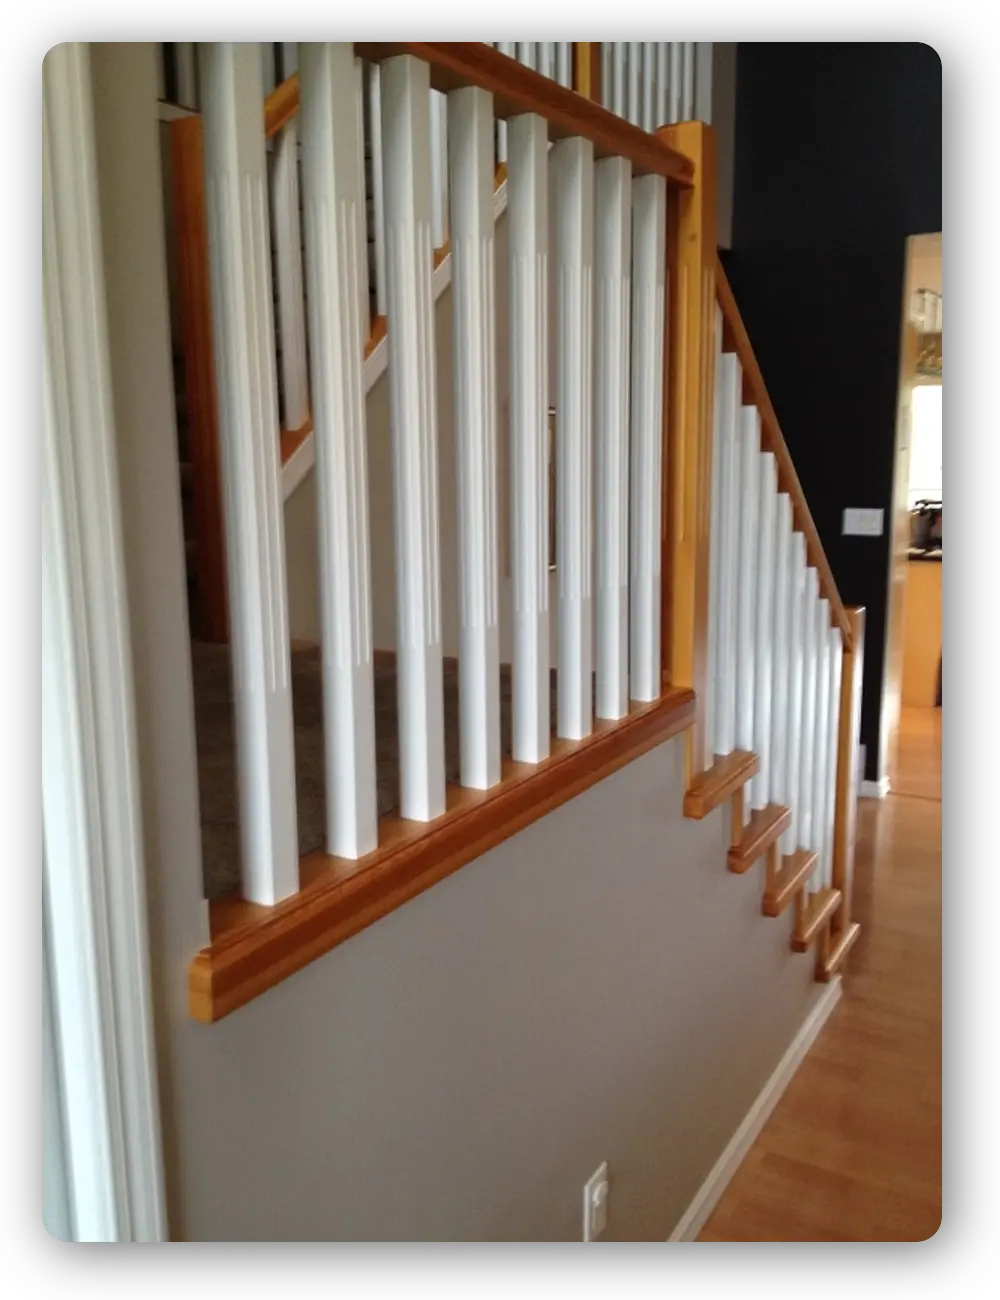 Natural wood railings with white spindles